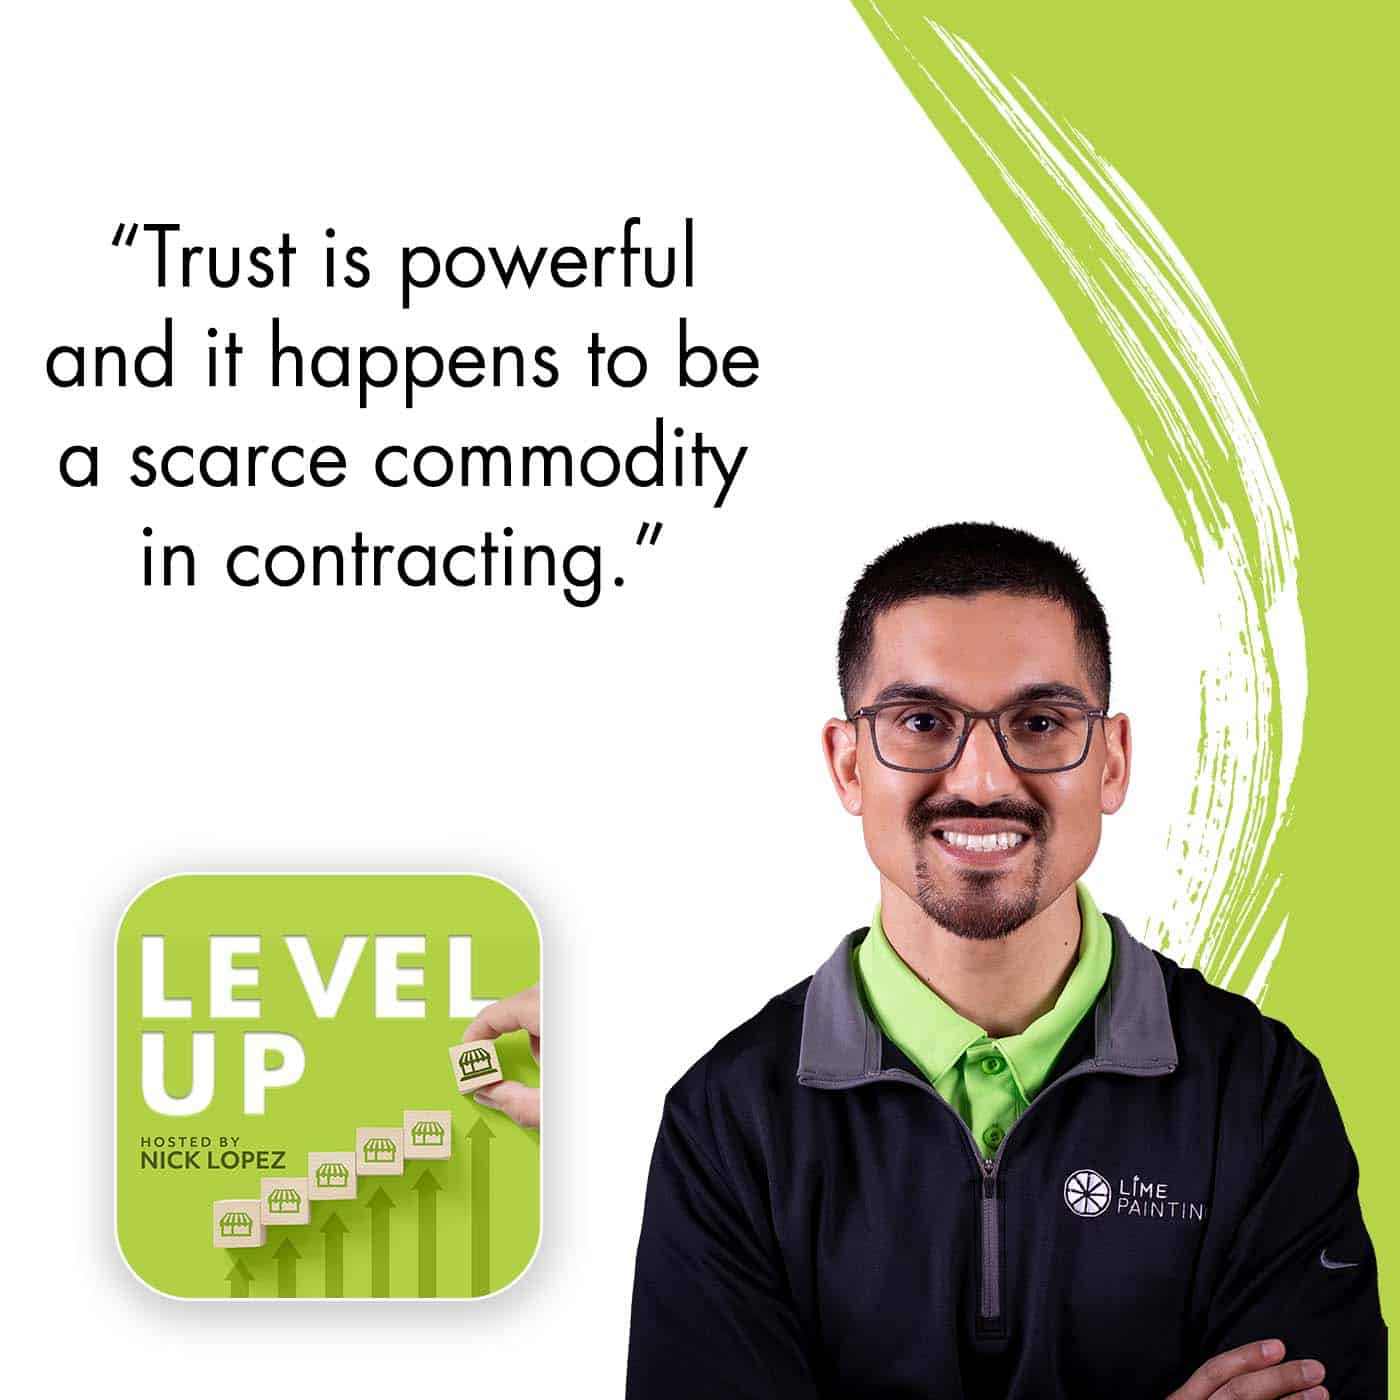 Level Up with Nick Lopez | Cory Griggs | Home Transformation